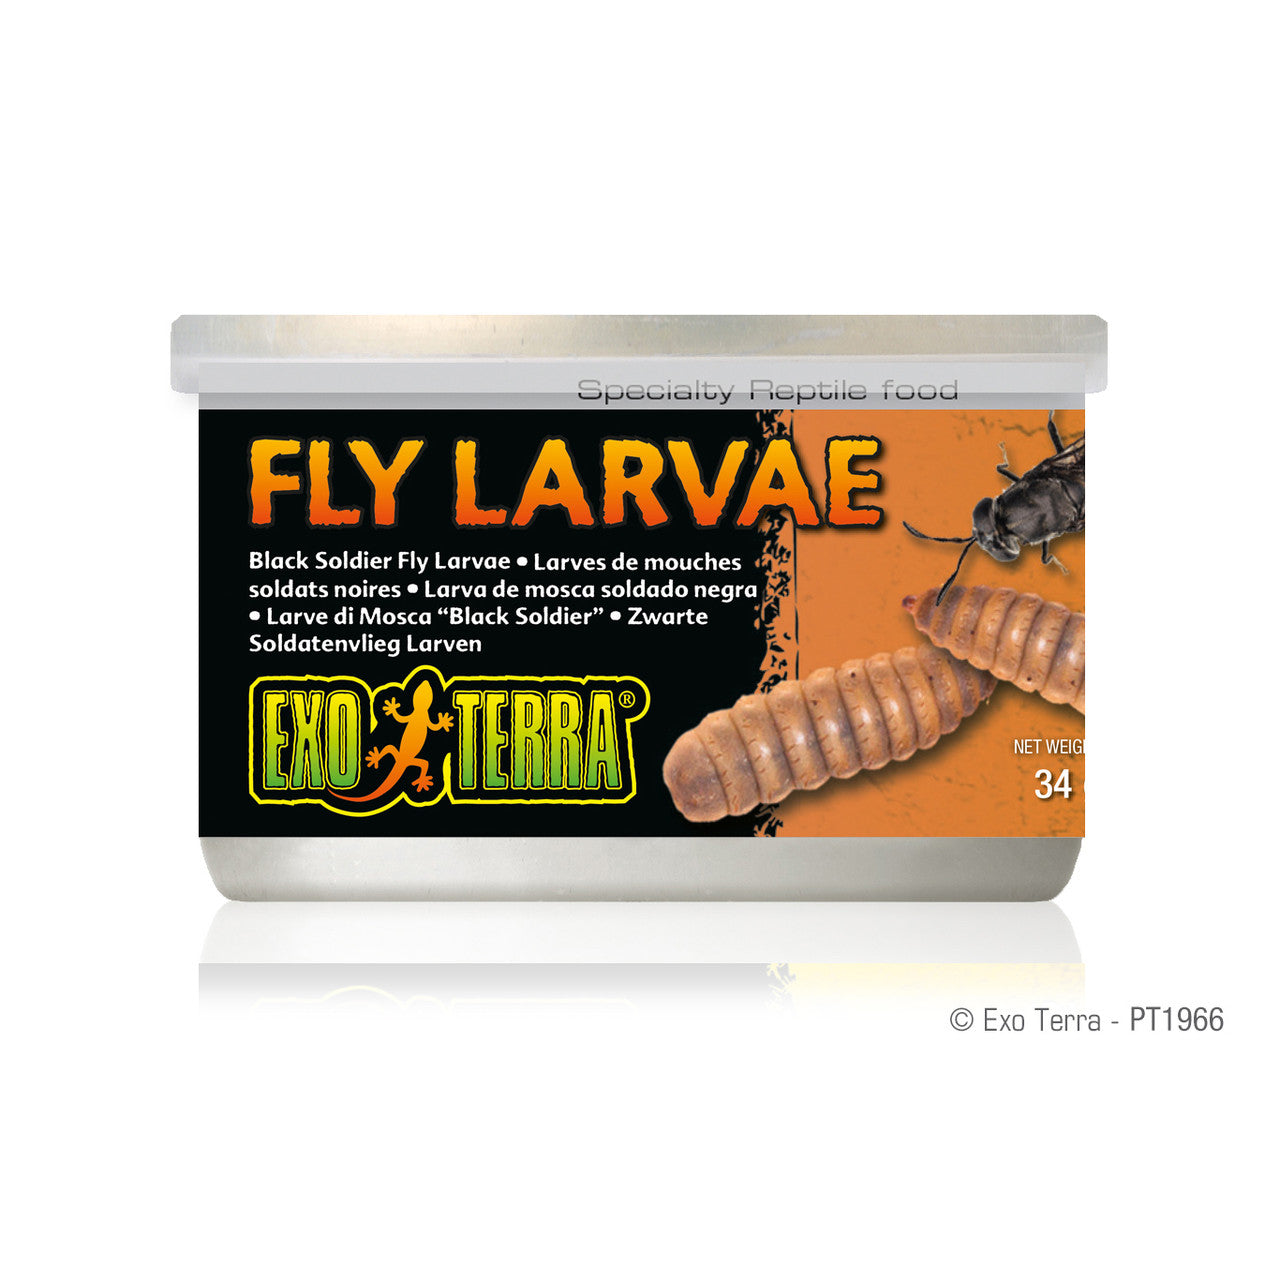 Exo Terra Canned Black Soldier Fly Larvae, 1.2 oz 015561219662